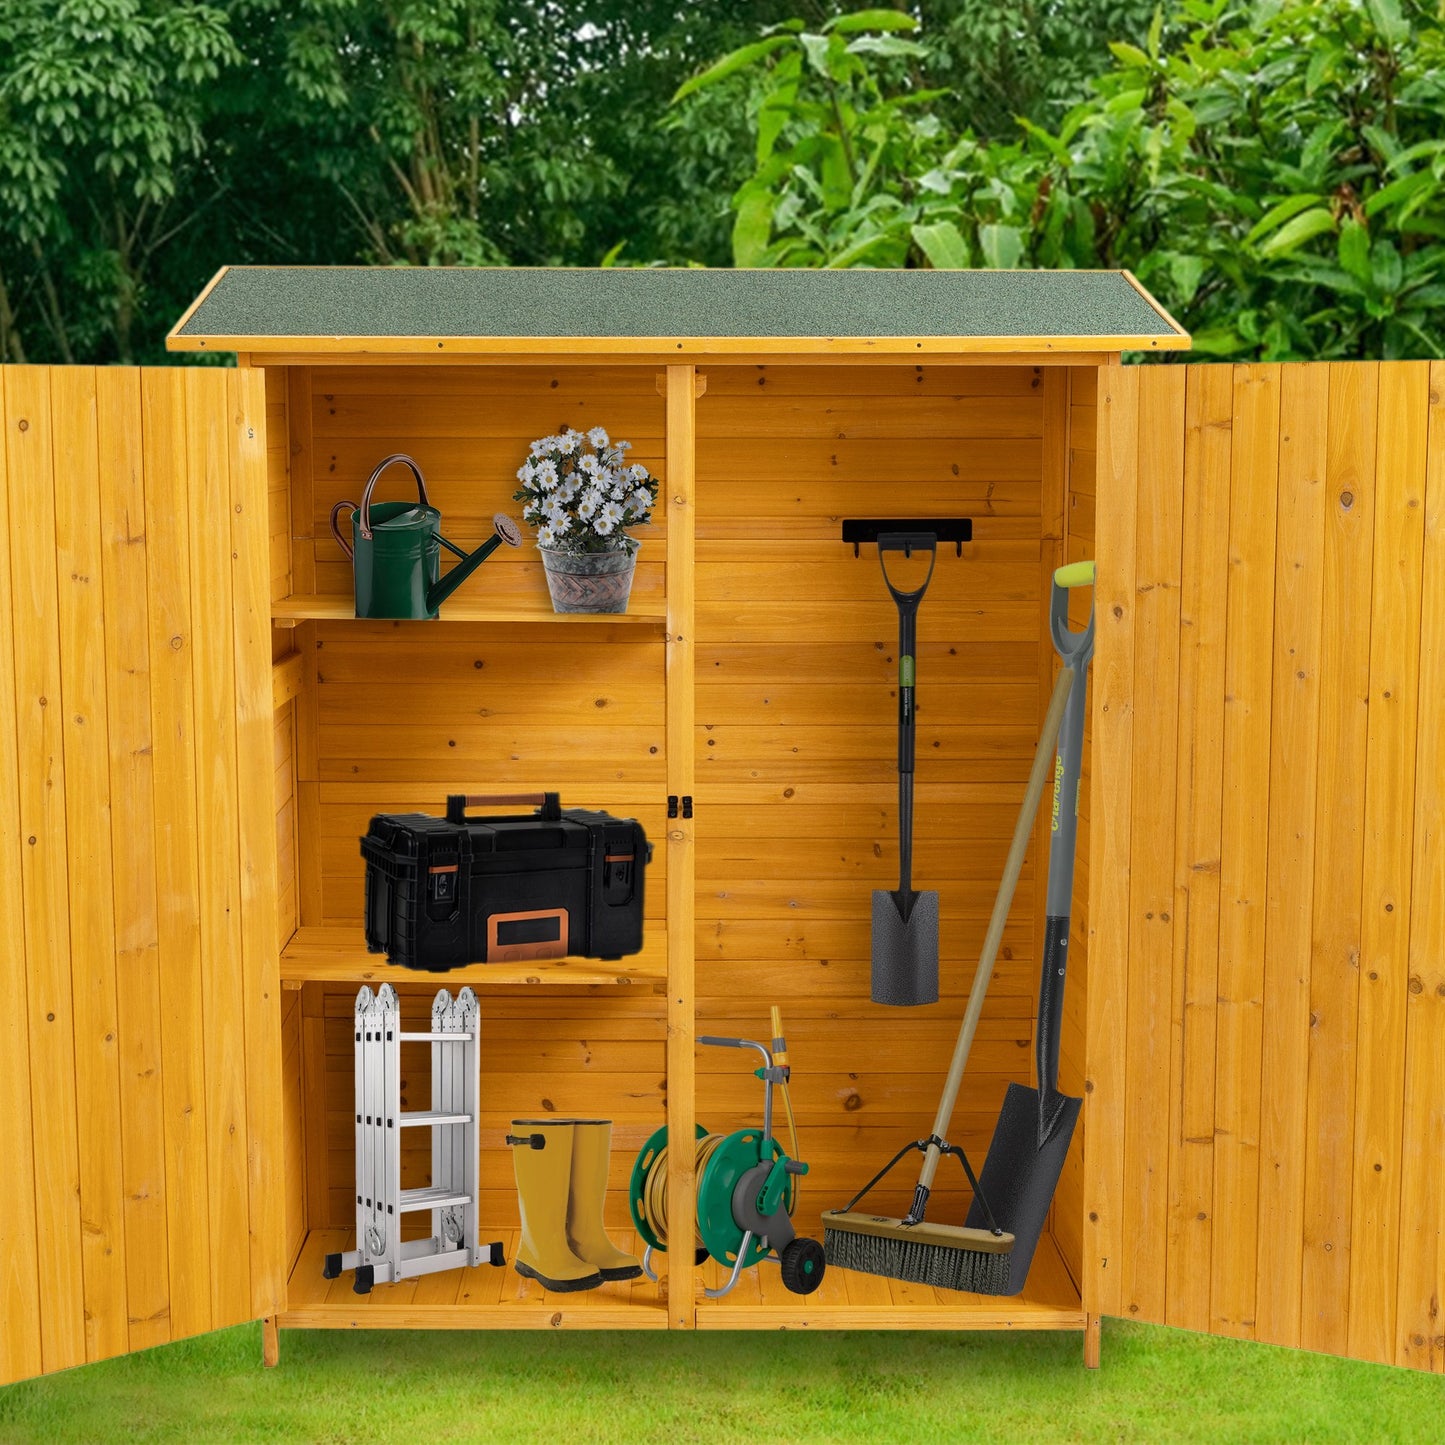 SYNGAR Patio Storage Shed with Detachable Shelves and Hooks, Outdoor Wood Shed with Waterproof Pitch Roof, Backyard Shed with Lockable Door, Bike Shed, Garden Shed, Tool Shed, Metal Shed, Natural